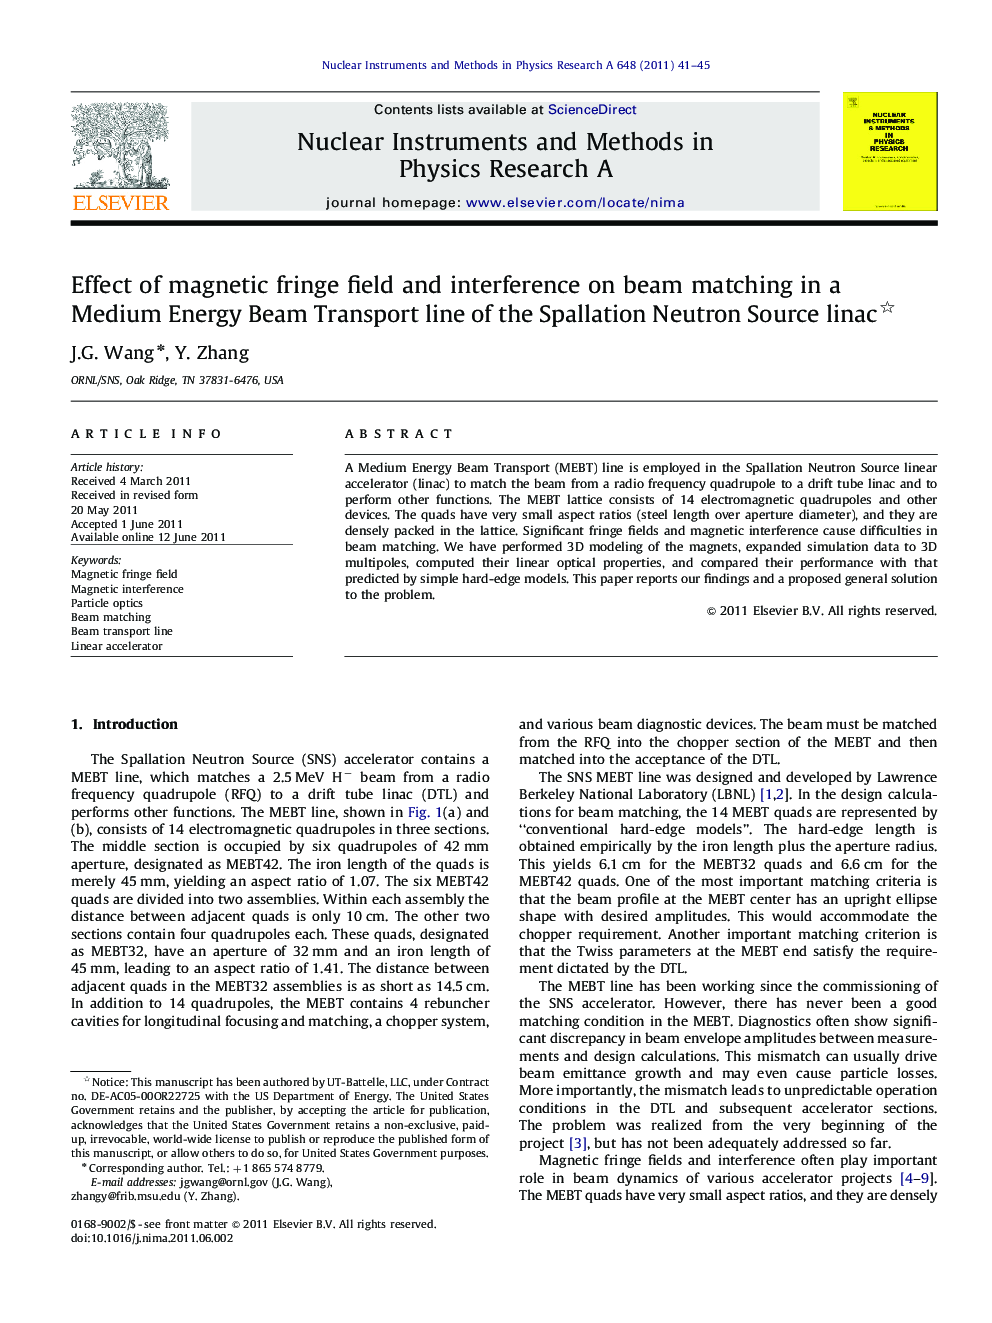 Effect of magnetic fringe field and interference on beam matching in a Medium Energy Beam Transport line of the Spallation Neutron Source linac